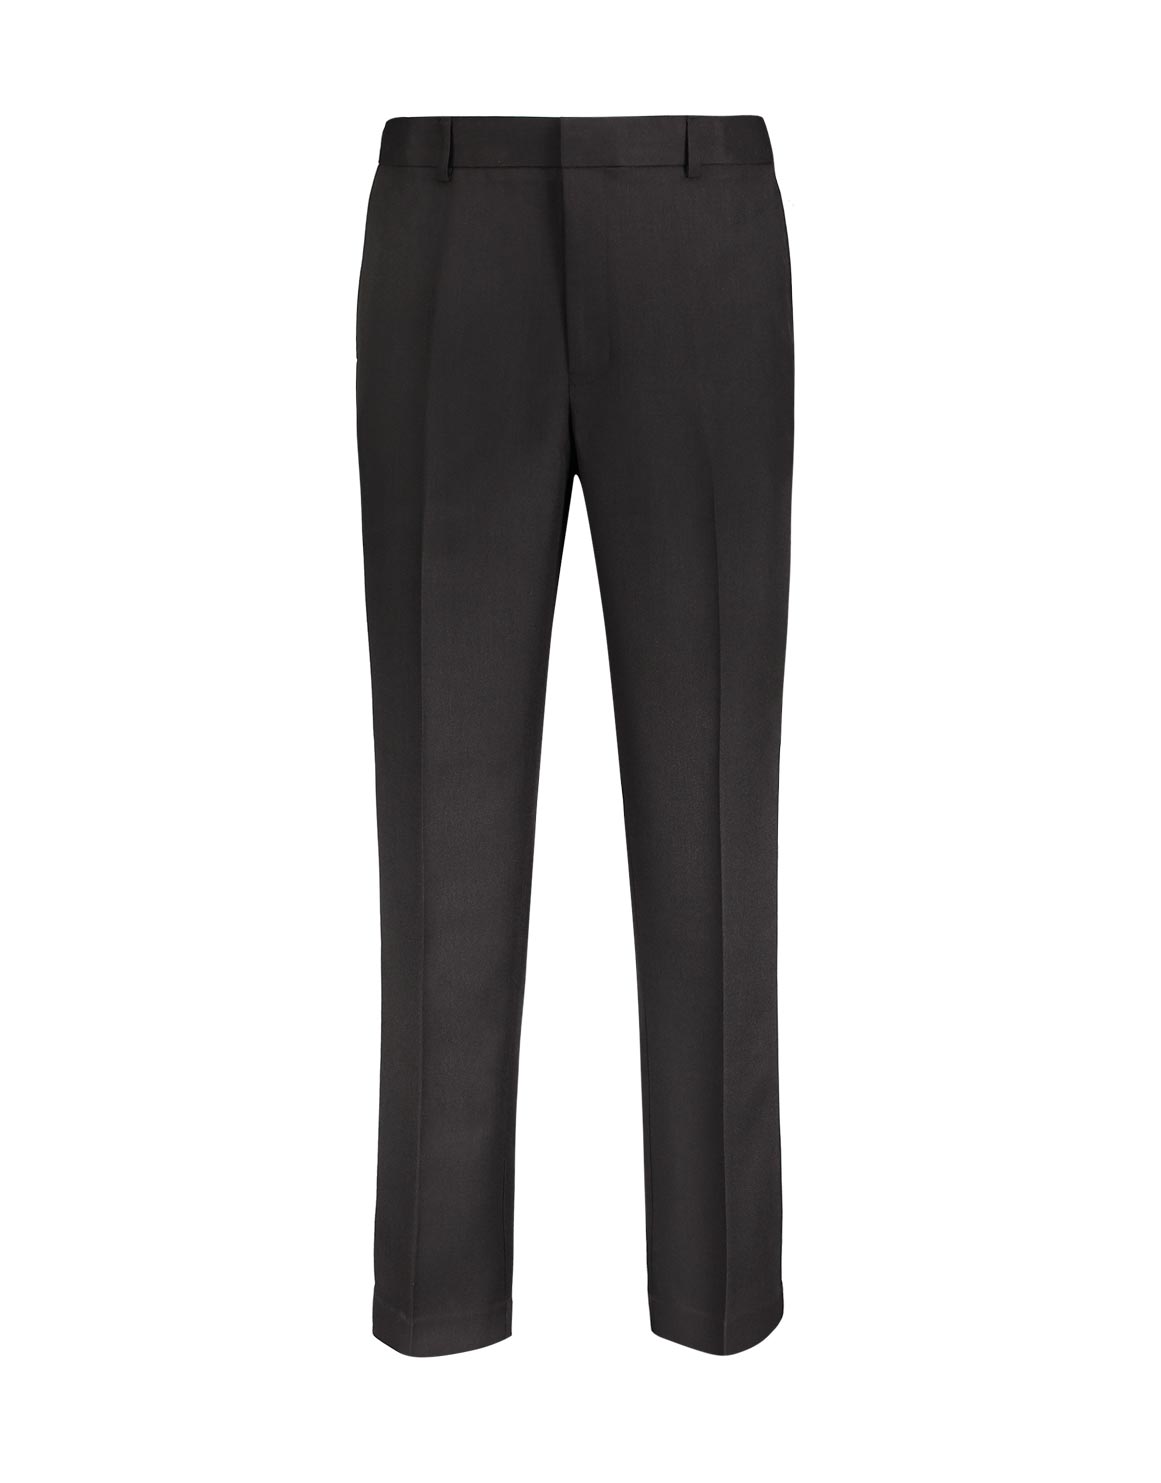 Easy Care Flat Front Trousers - Woolworths Mauritius Online